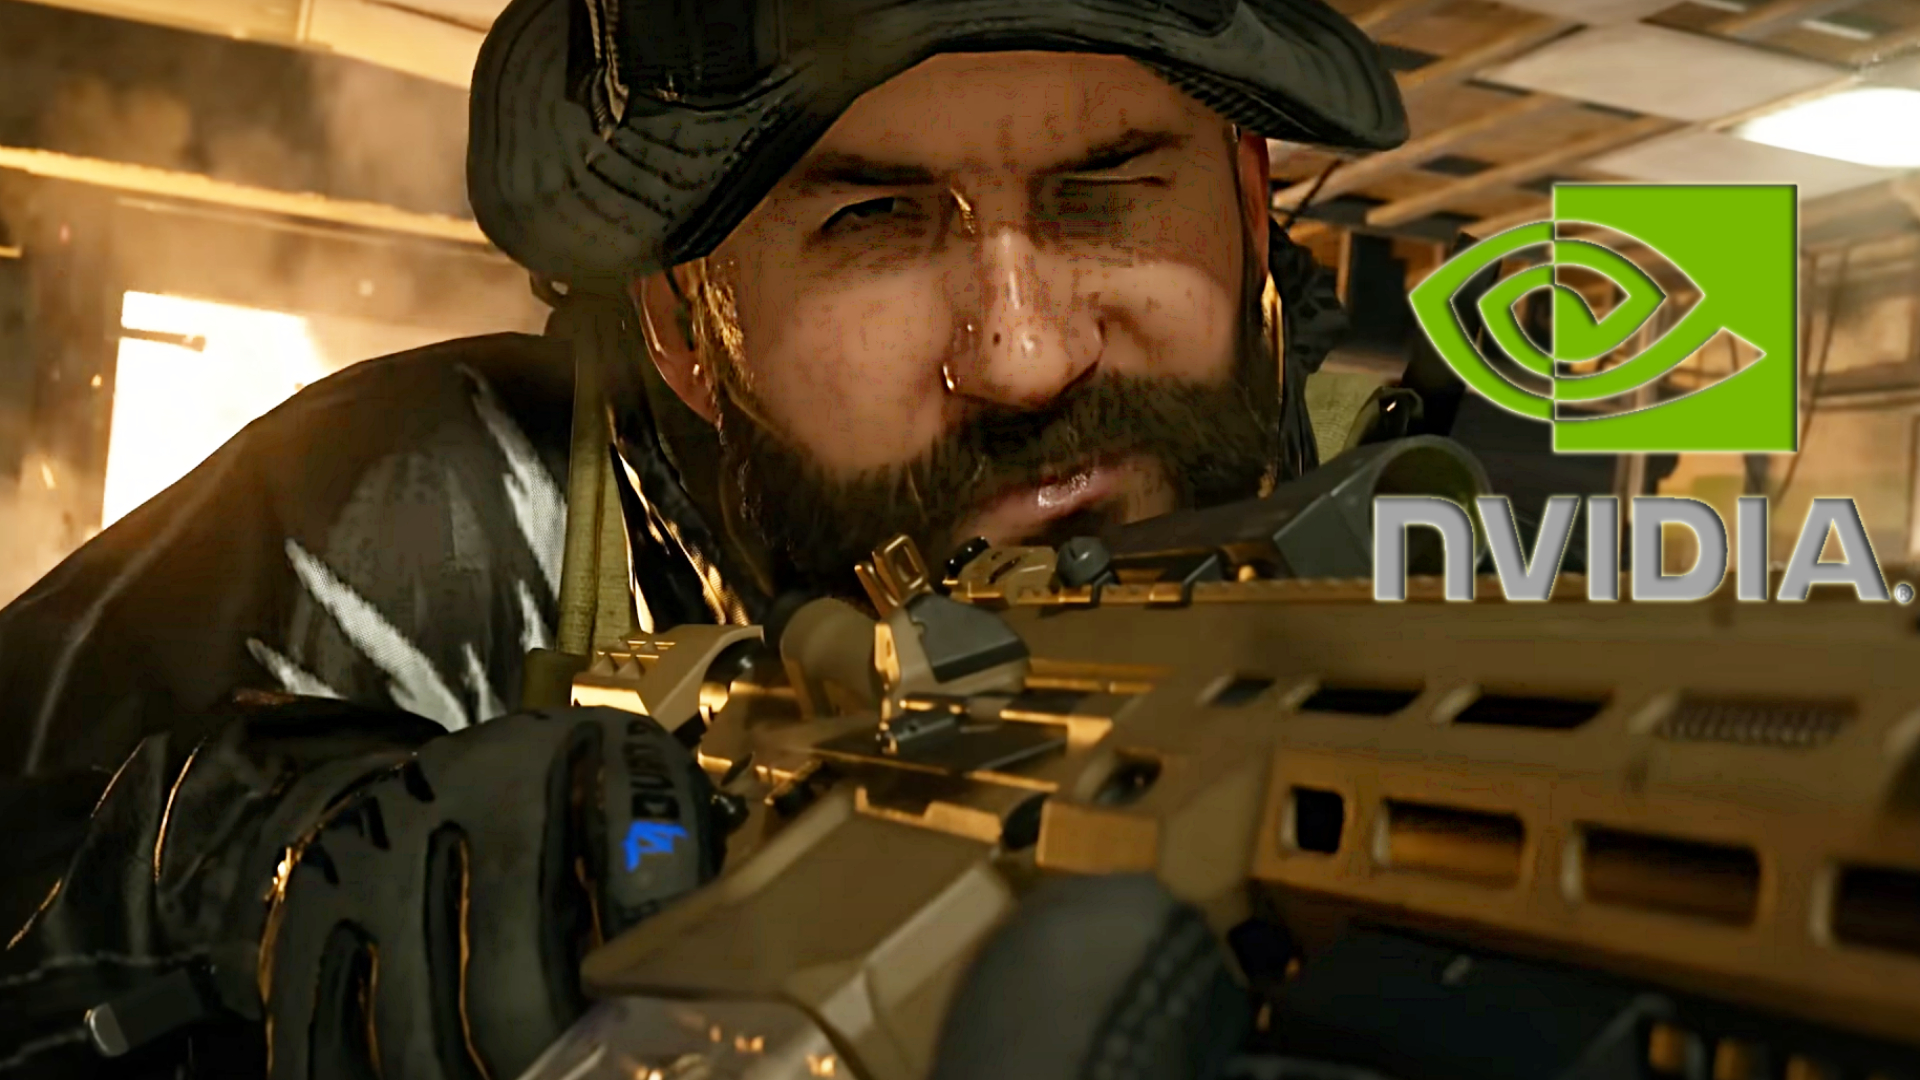 Get the edge in MW3 with this new Nvidia driver